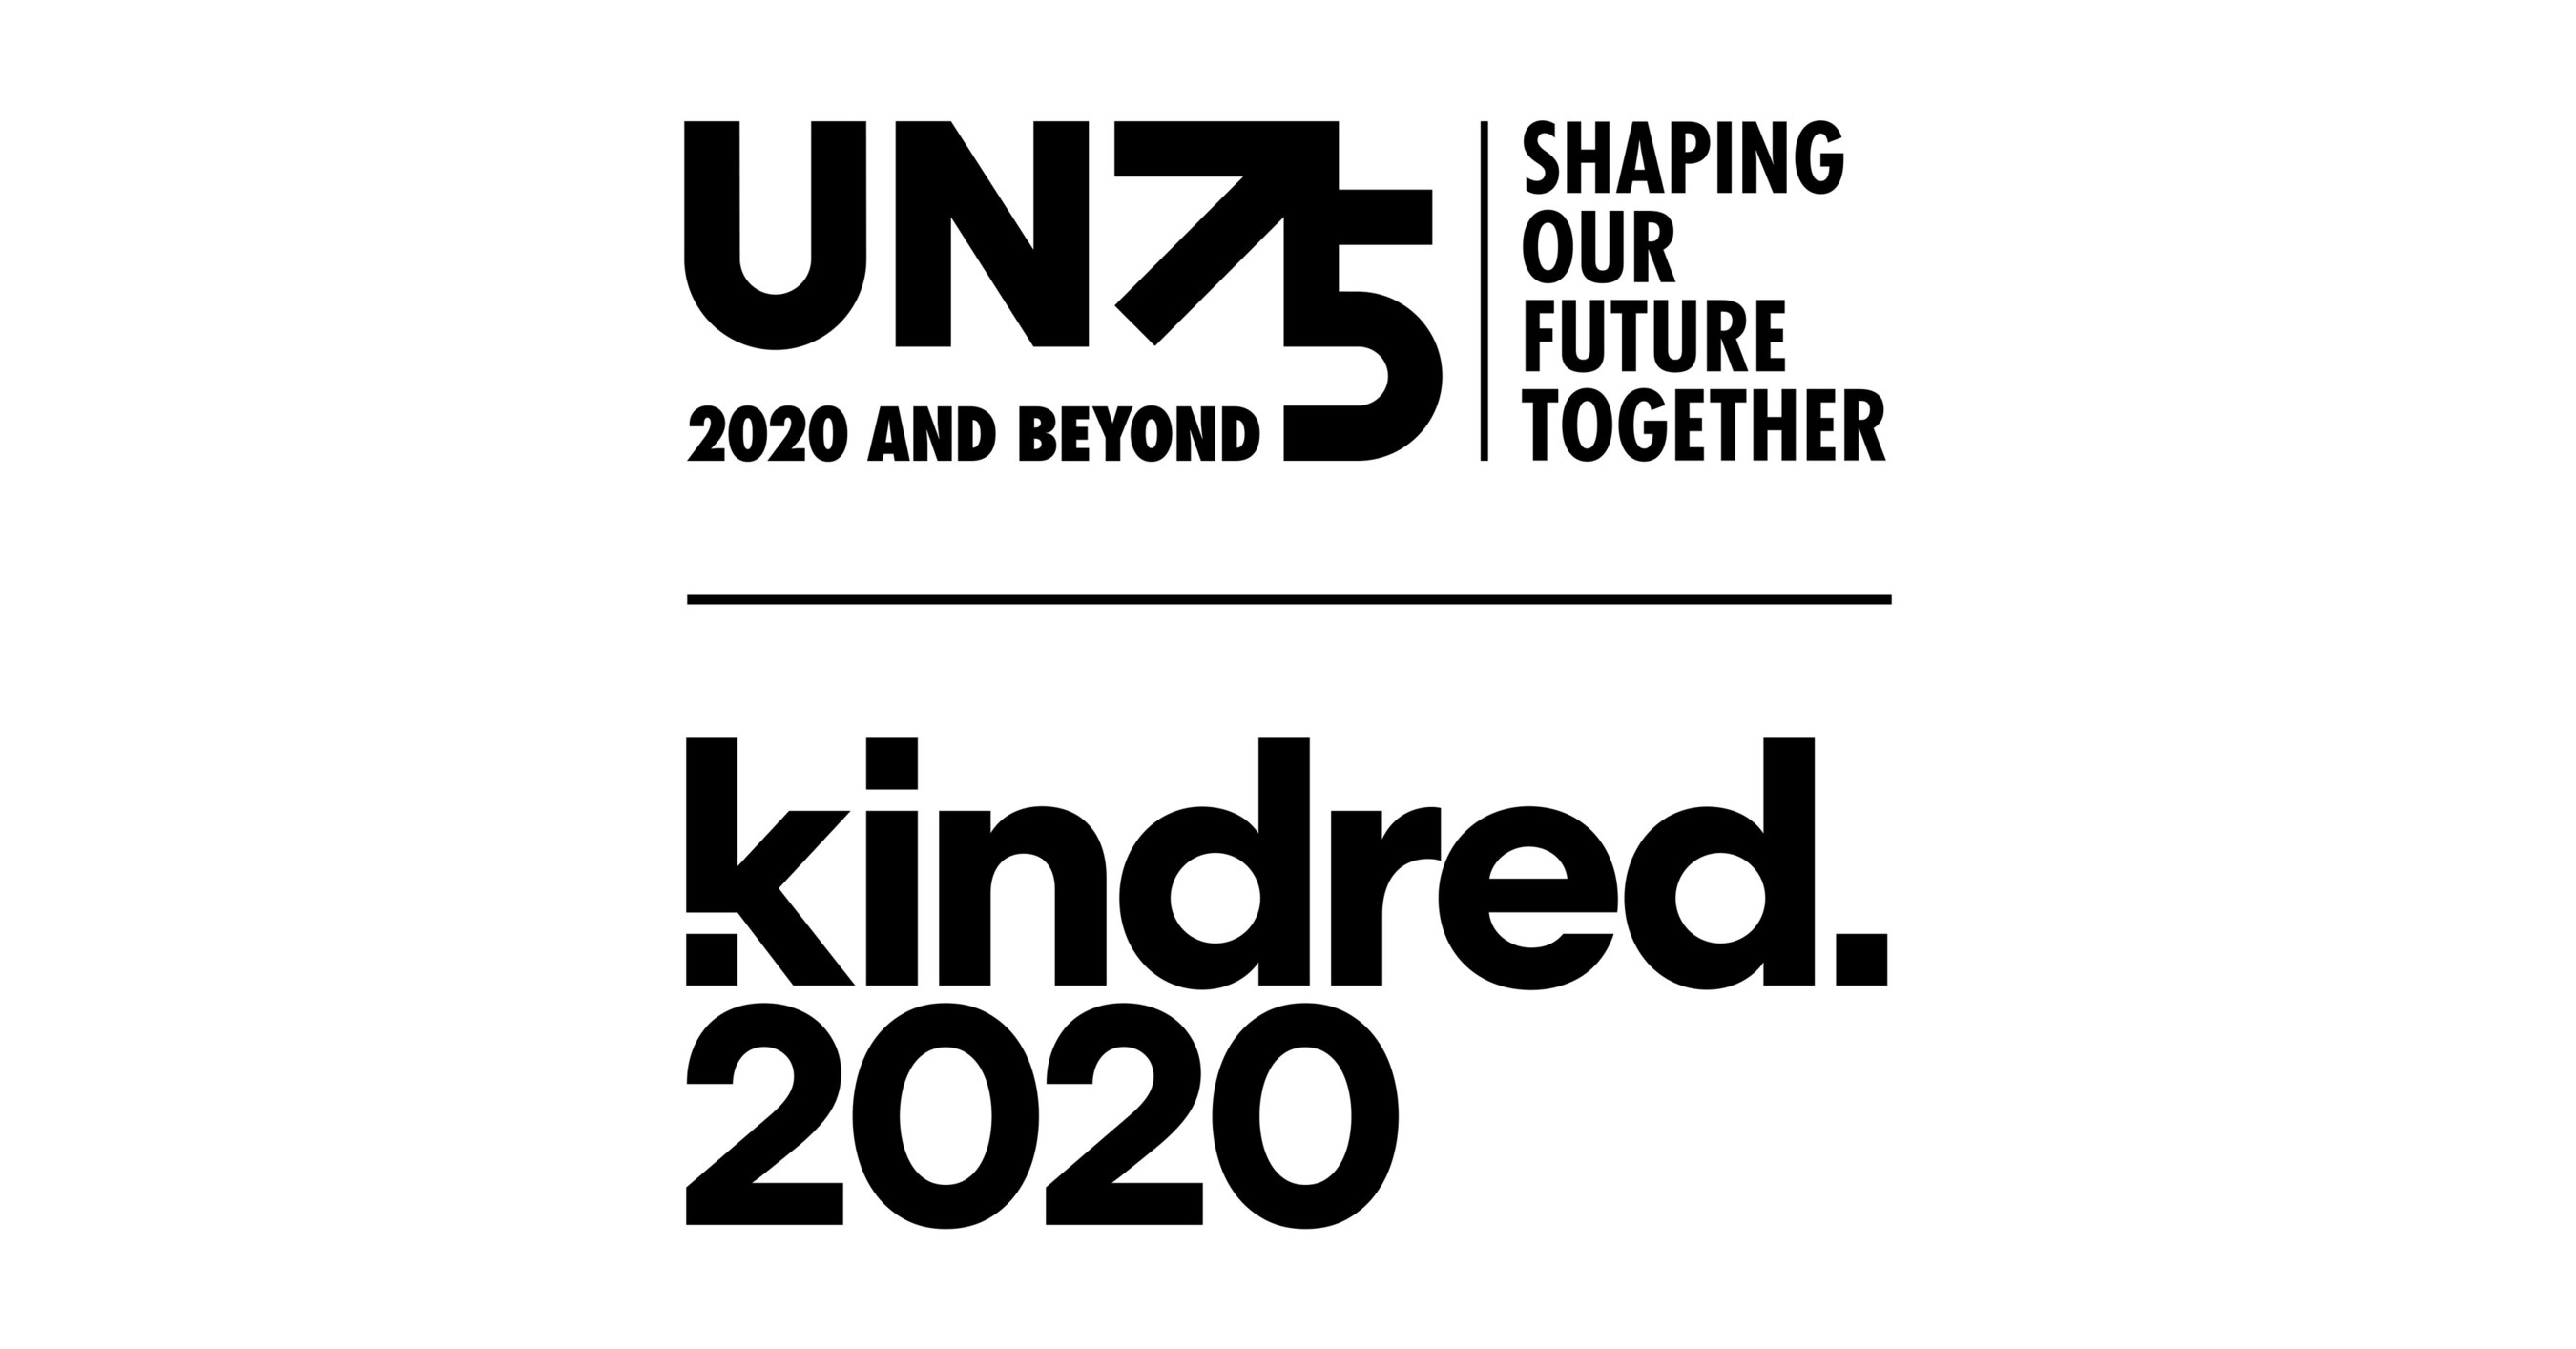 Kindred 2020 and the United Nations Announce Collaboration to Engage